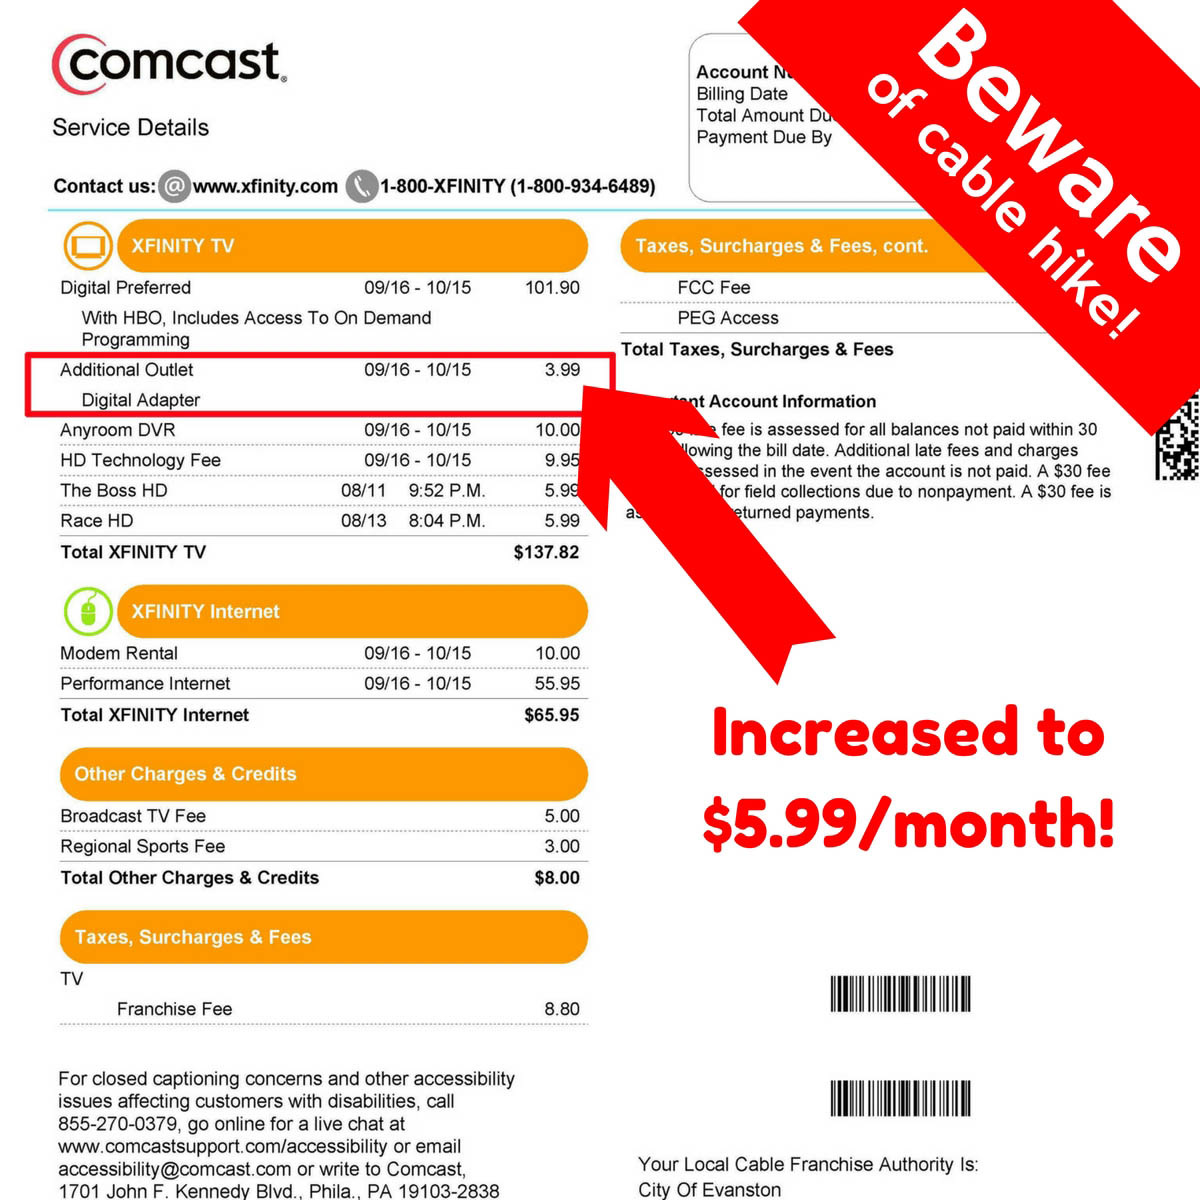 Check Your Comcast Bill Are You Paying A digital Adapter Fee 